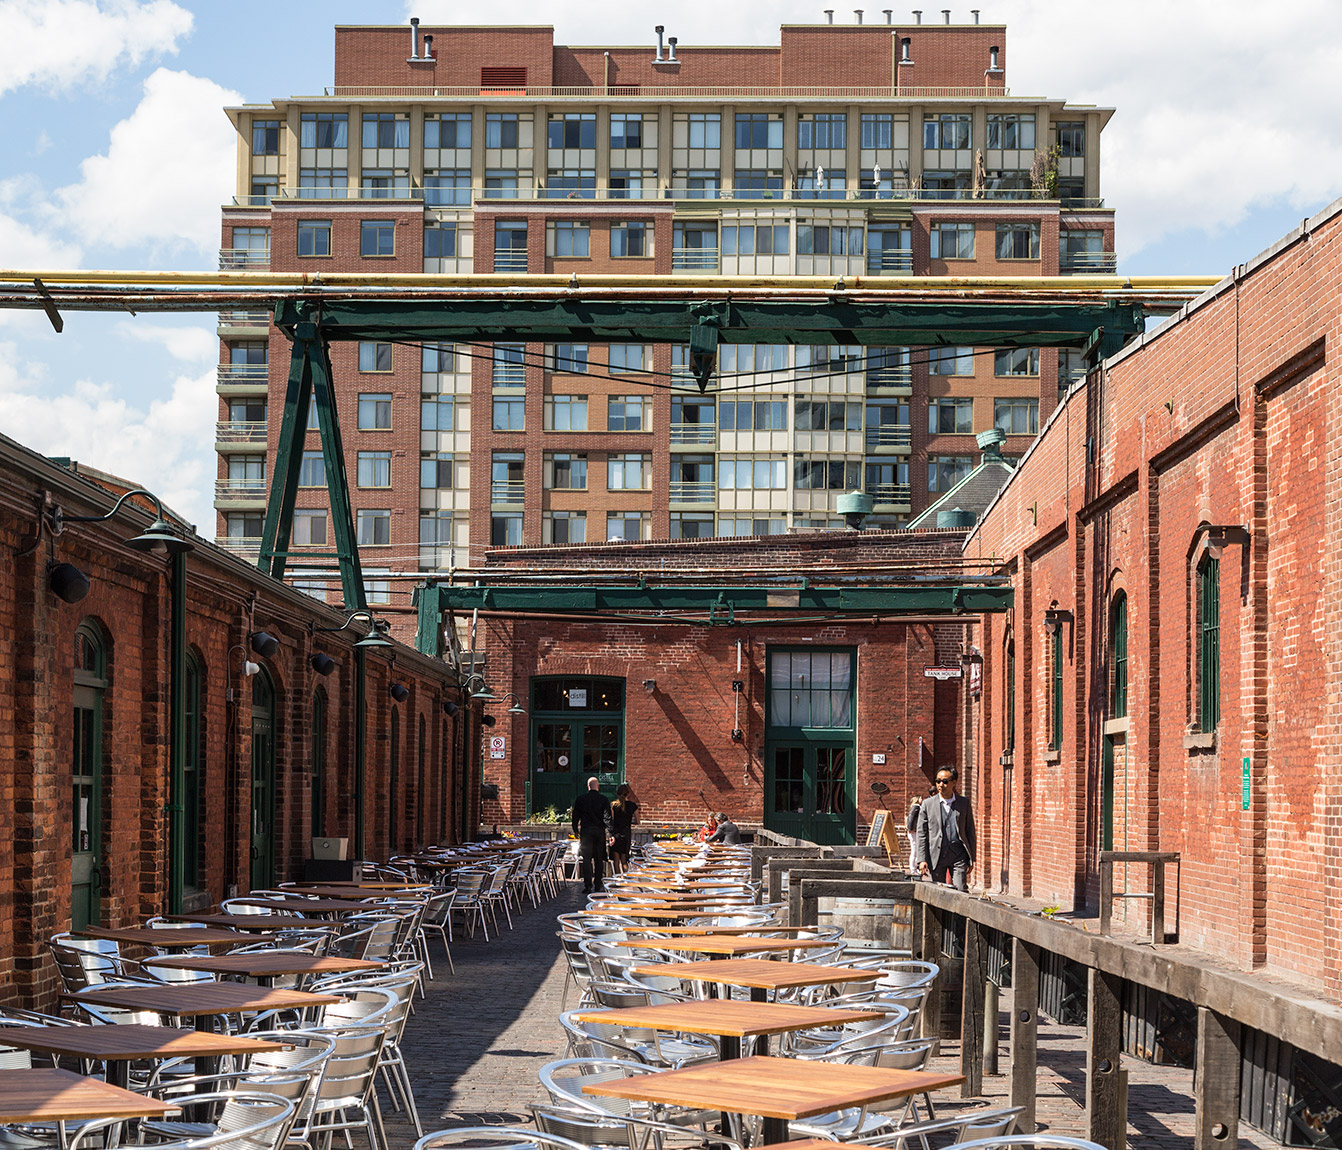 20160609. Almost dinner time in the Distillery District.